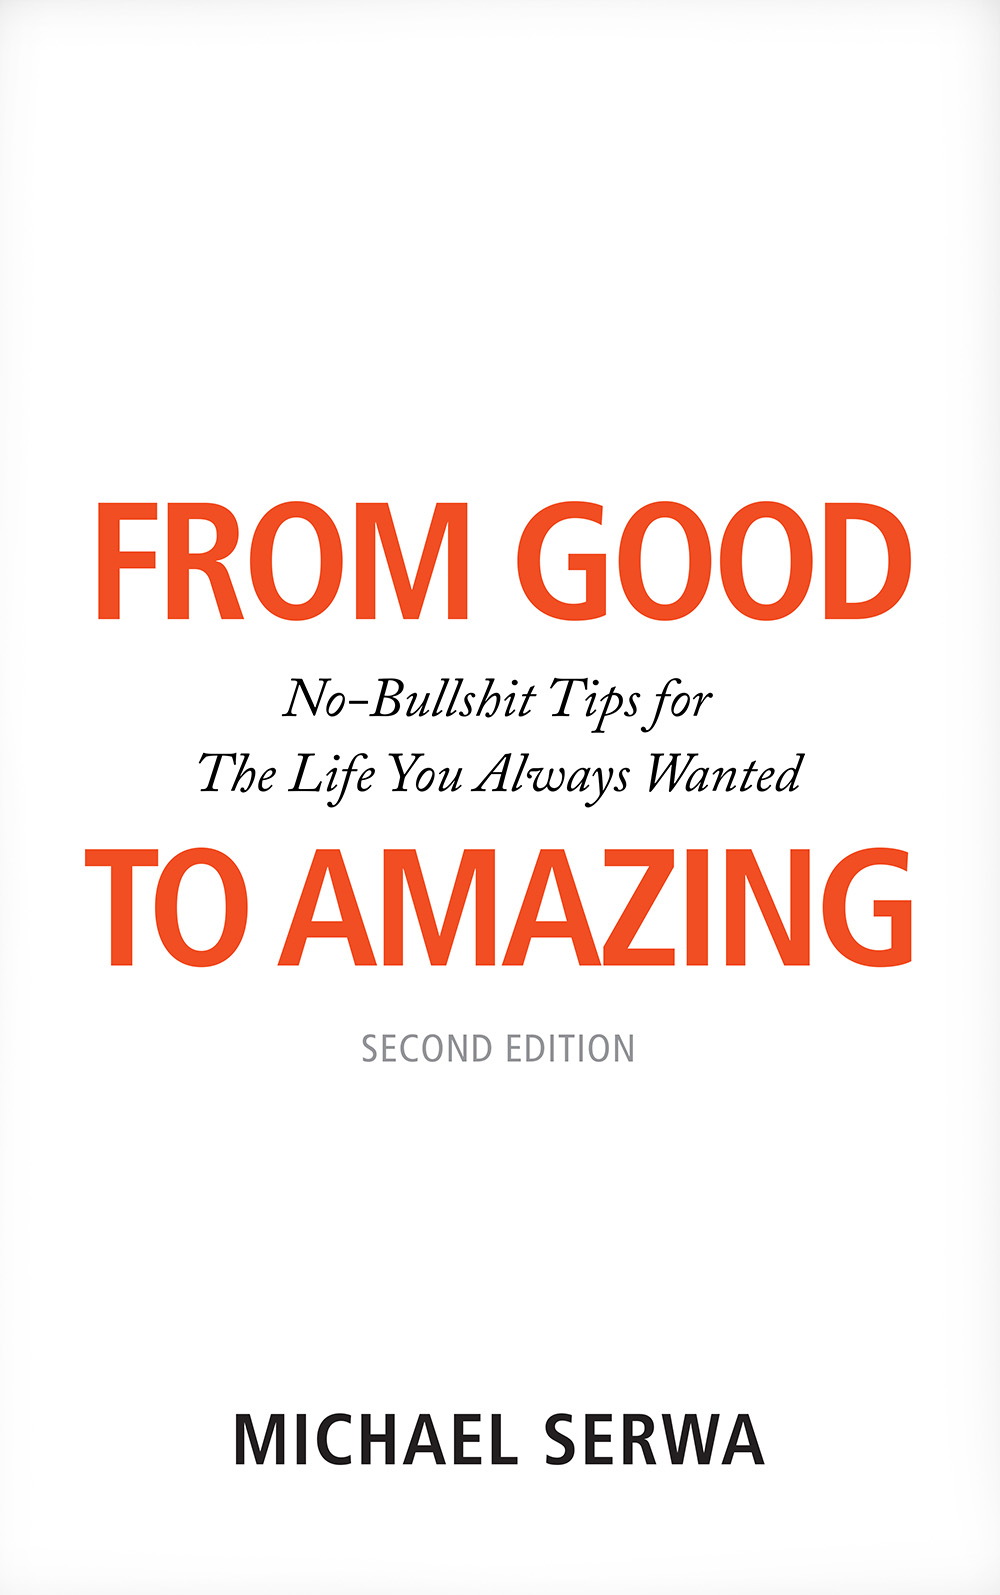 Michael Serwa - From Good to Amazing. No-Bullshit Tips for The Life You Always Wanted (book cover)